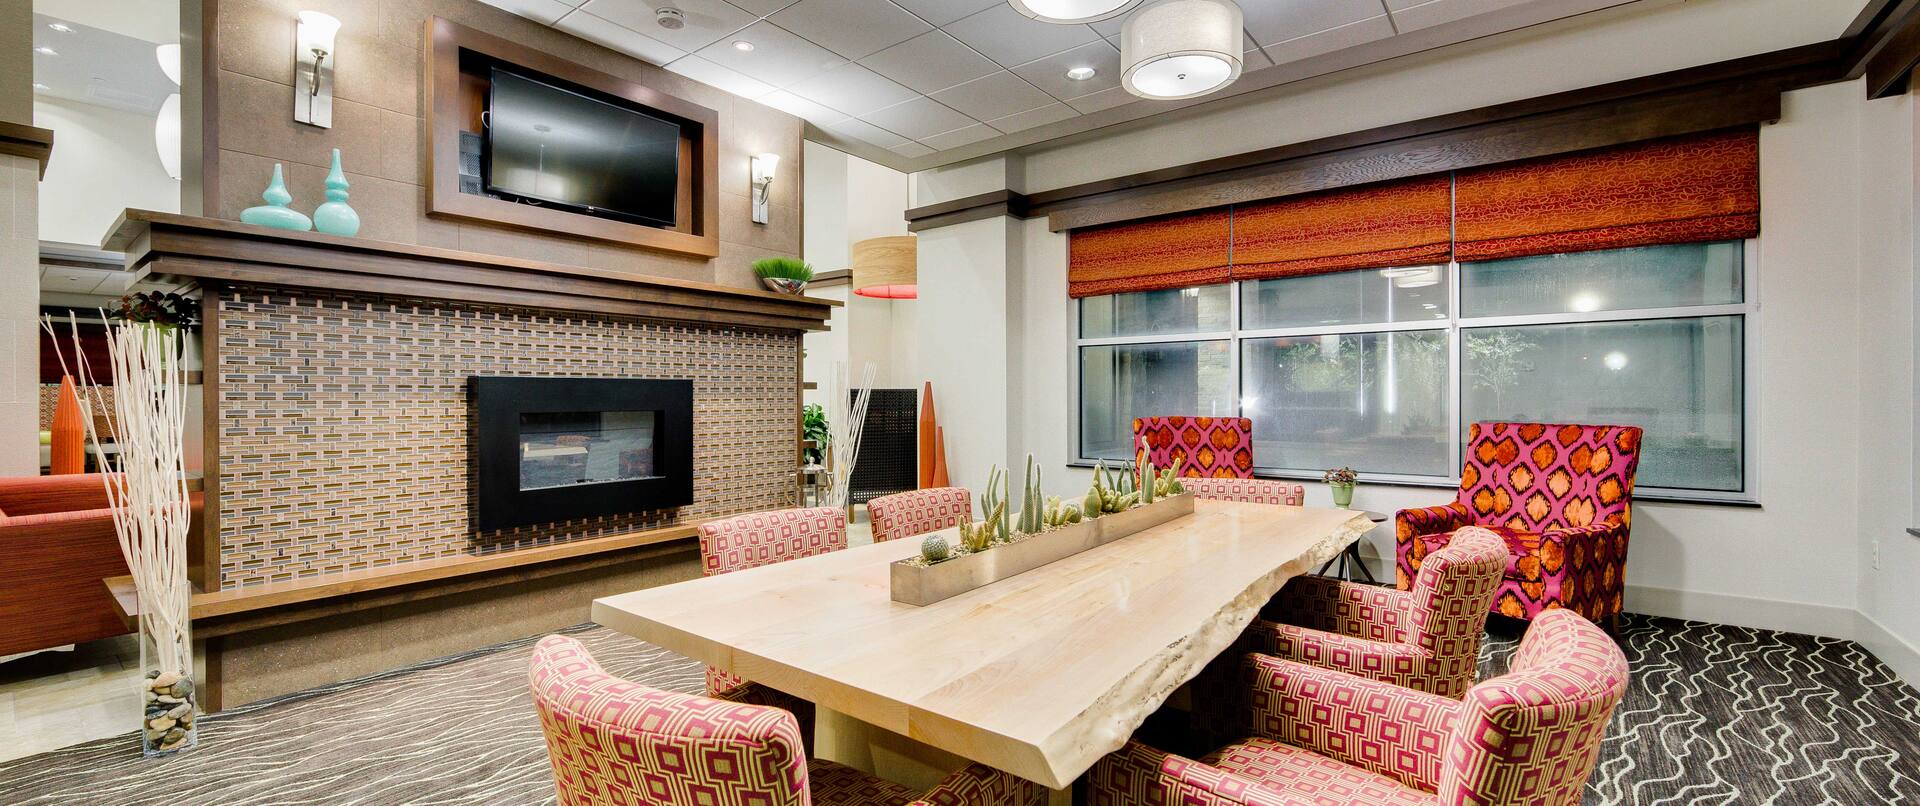 TV Above Fireplace, Table With Seating for Six, and Two Arm Chairs by Windows in Library Lounge Area 